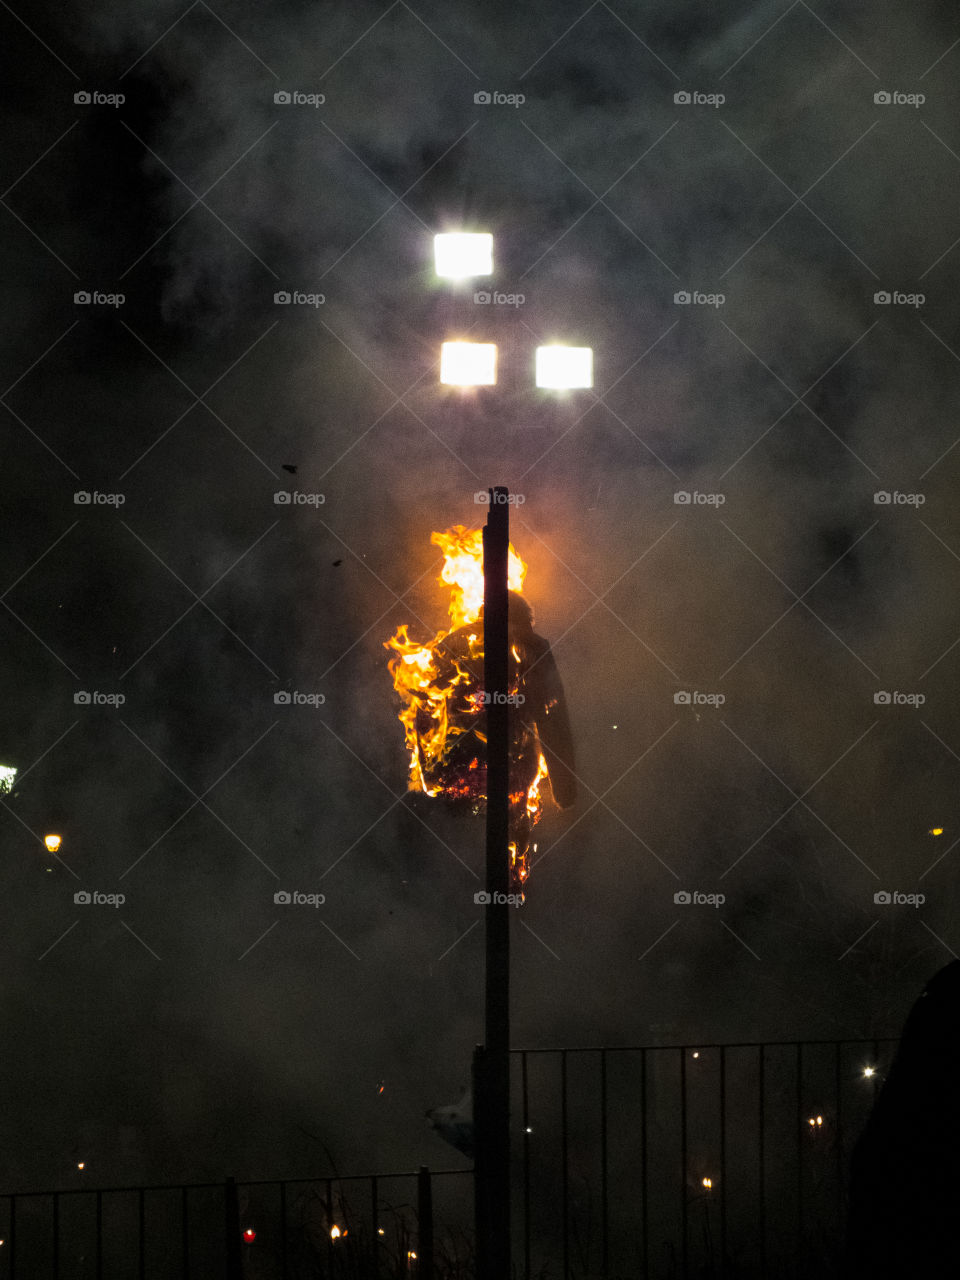 A Judas effigy is burning on Easter's Eve in Arta, Greece.